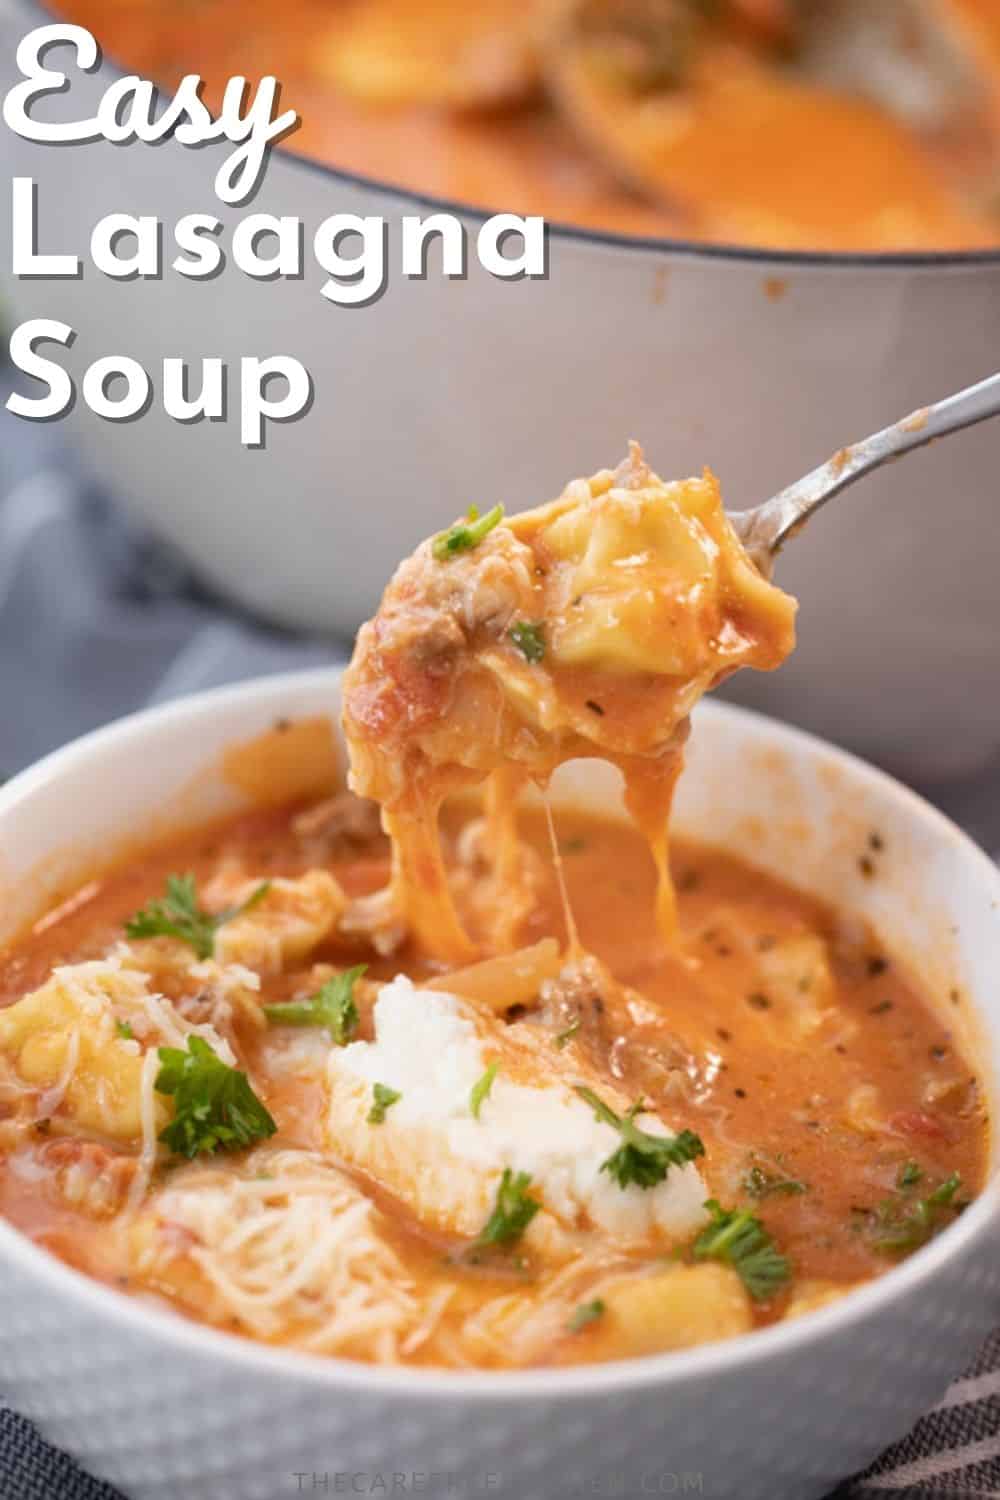 Easy Lasagna Soup Recipe - The Carefree Kitchen